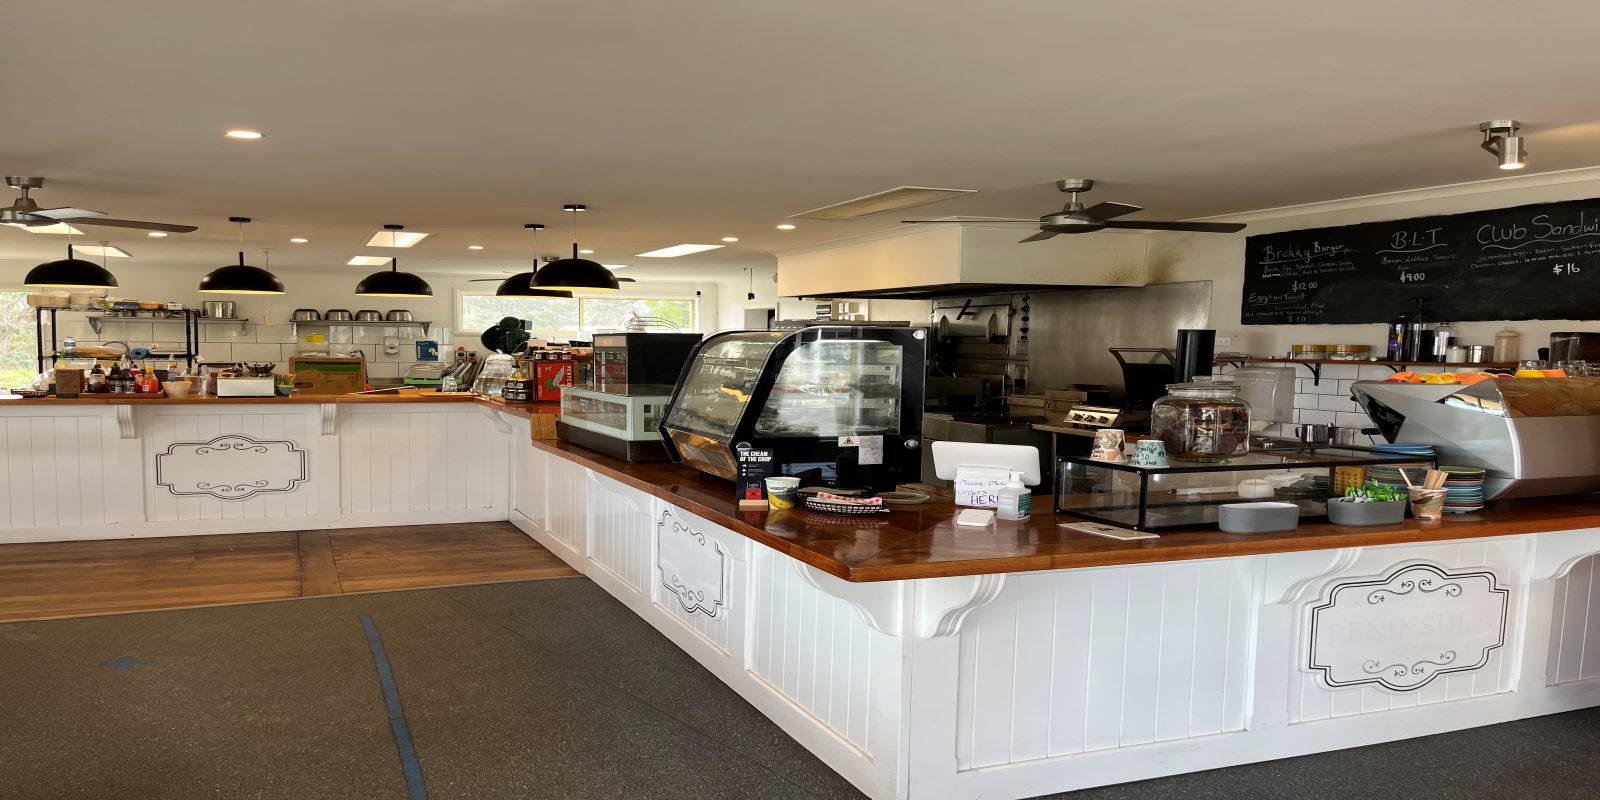 Takeaway or dine in food option located in Nubeena offering hamburgers and fish and chips